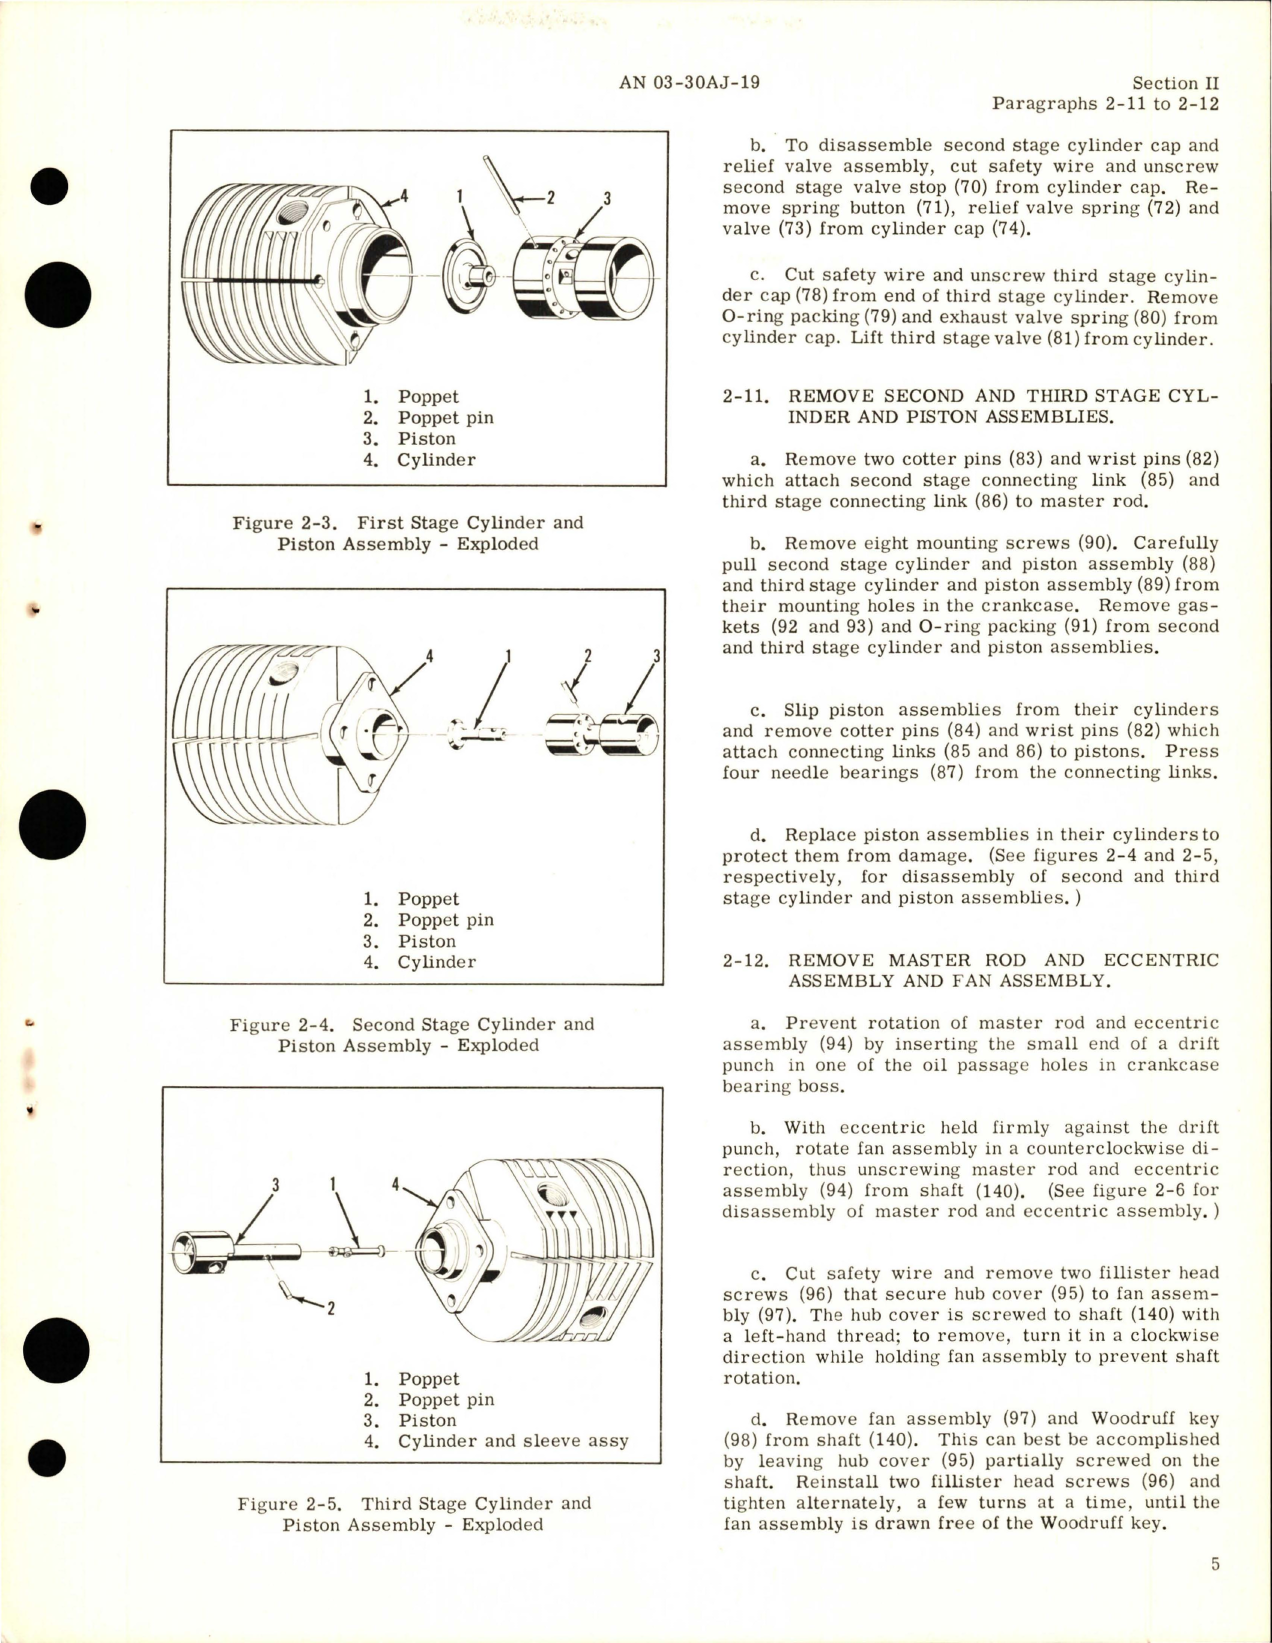 Sample page 9 from AirCorps Library document: Overhaul Instructions for Compressor Assembly